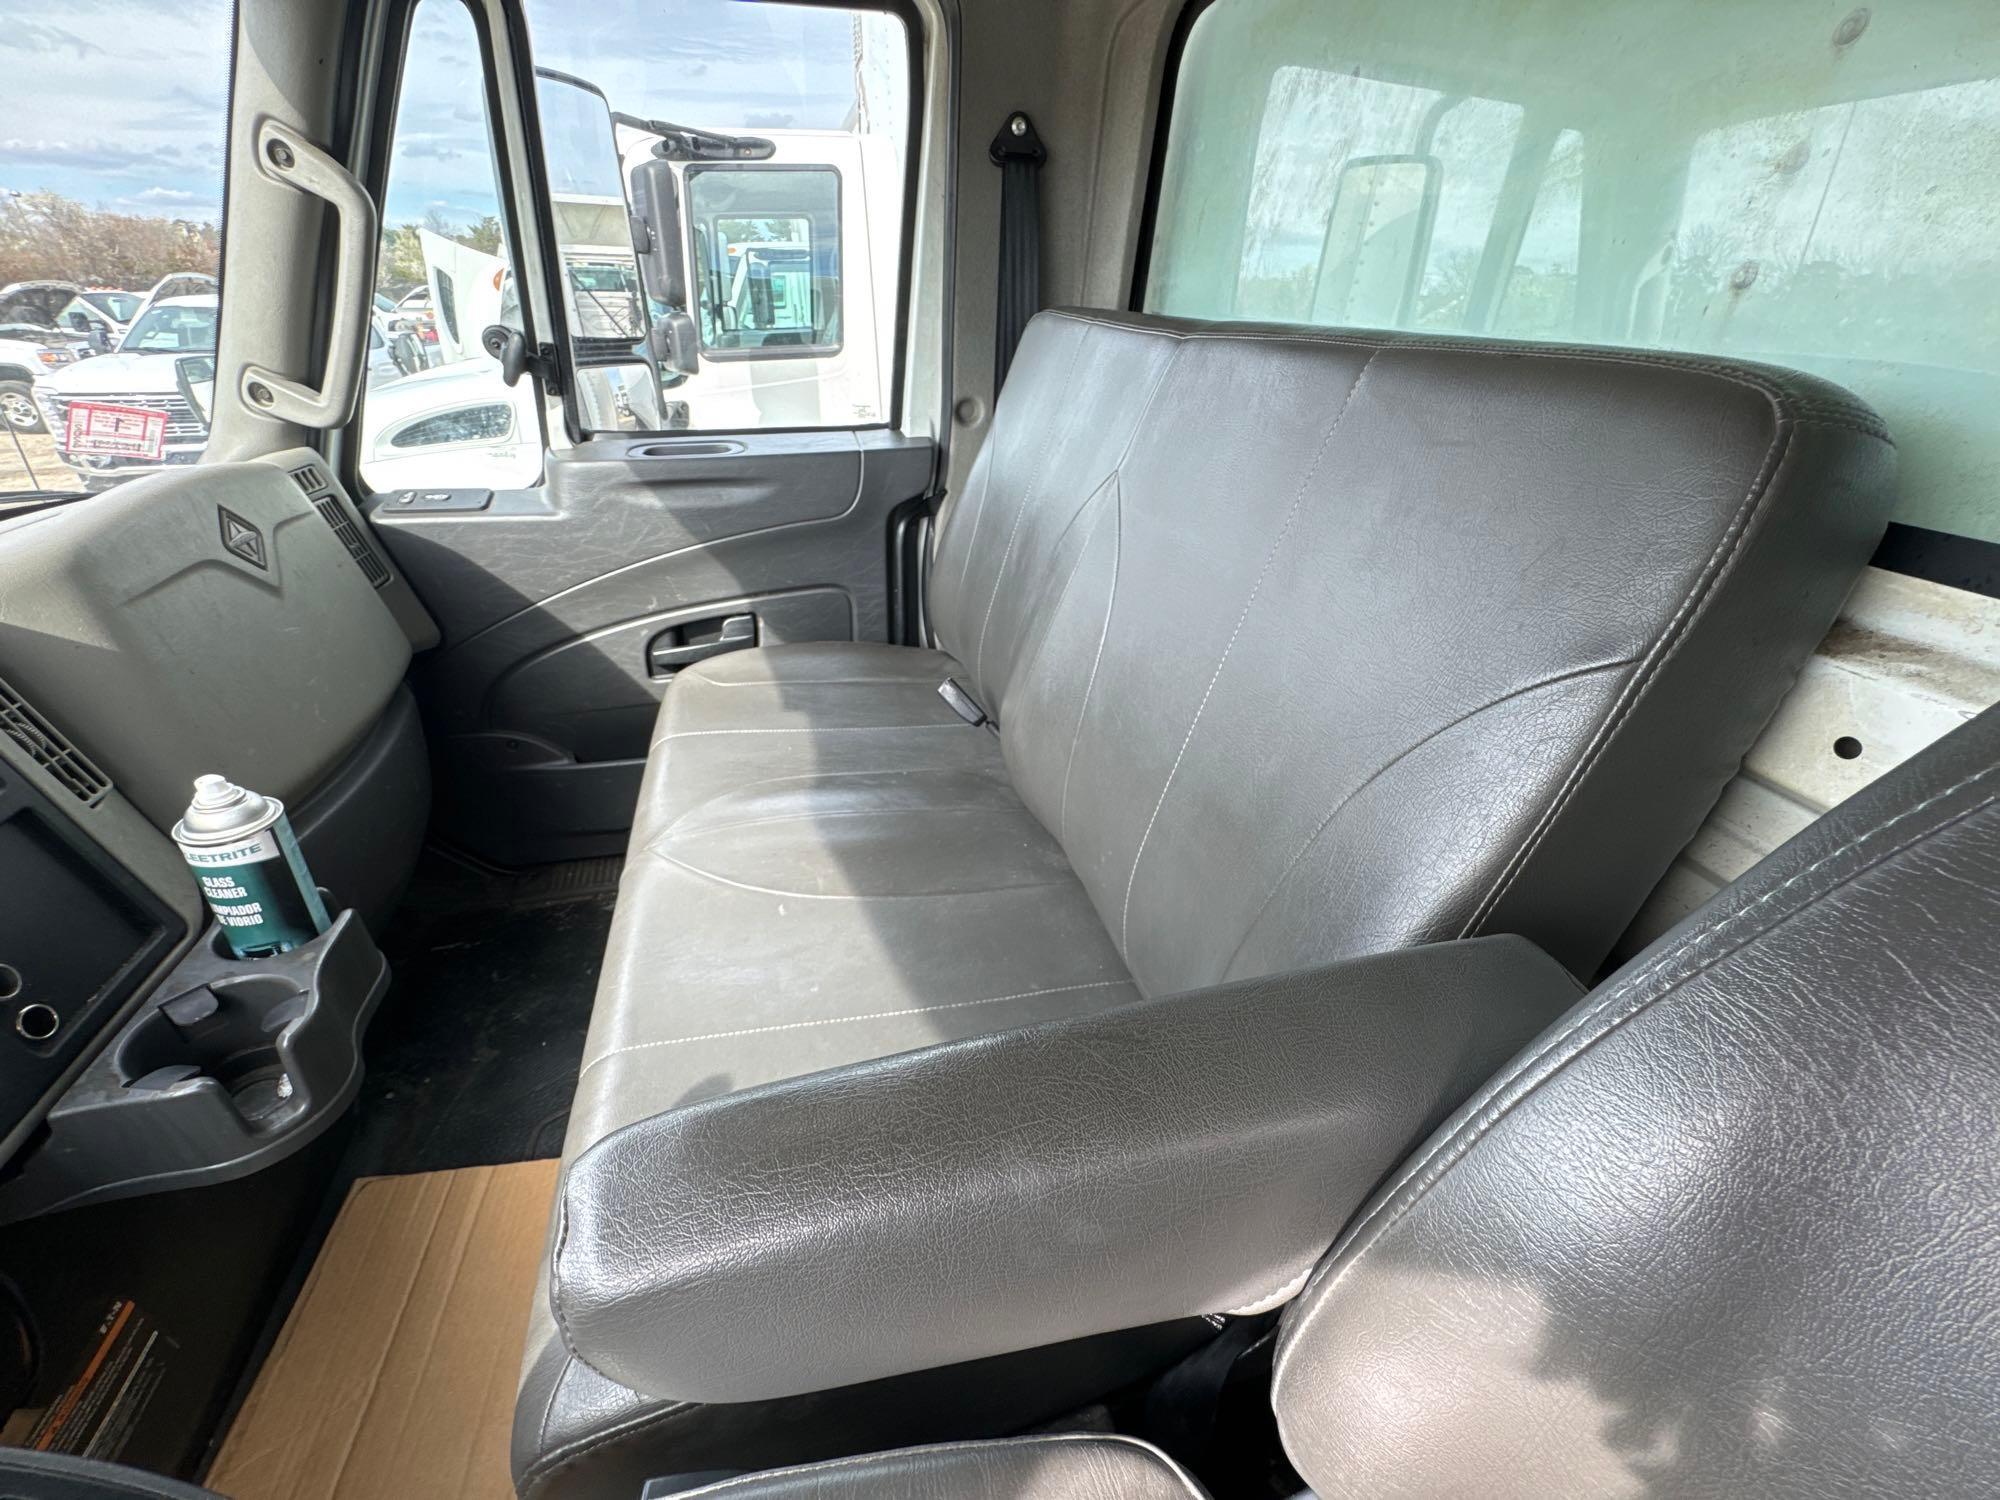 2017 INTERNATIONAL 4300 VAN TRUCK VN:1HTMMMMN9HH158520 powered by diesel engine, equipped with power